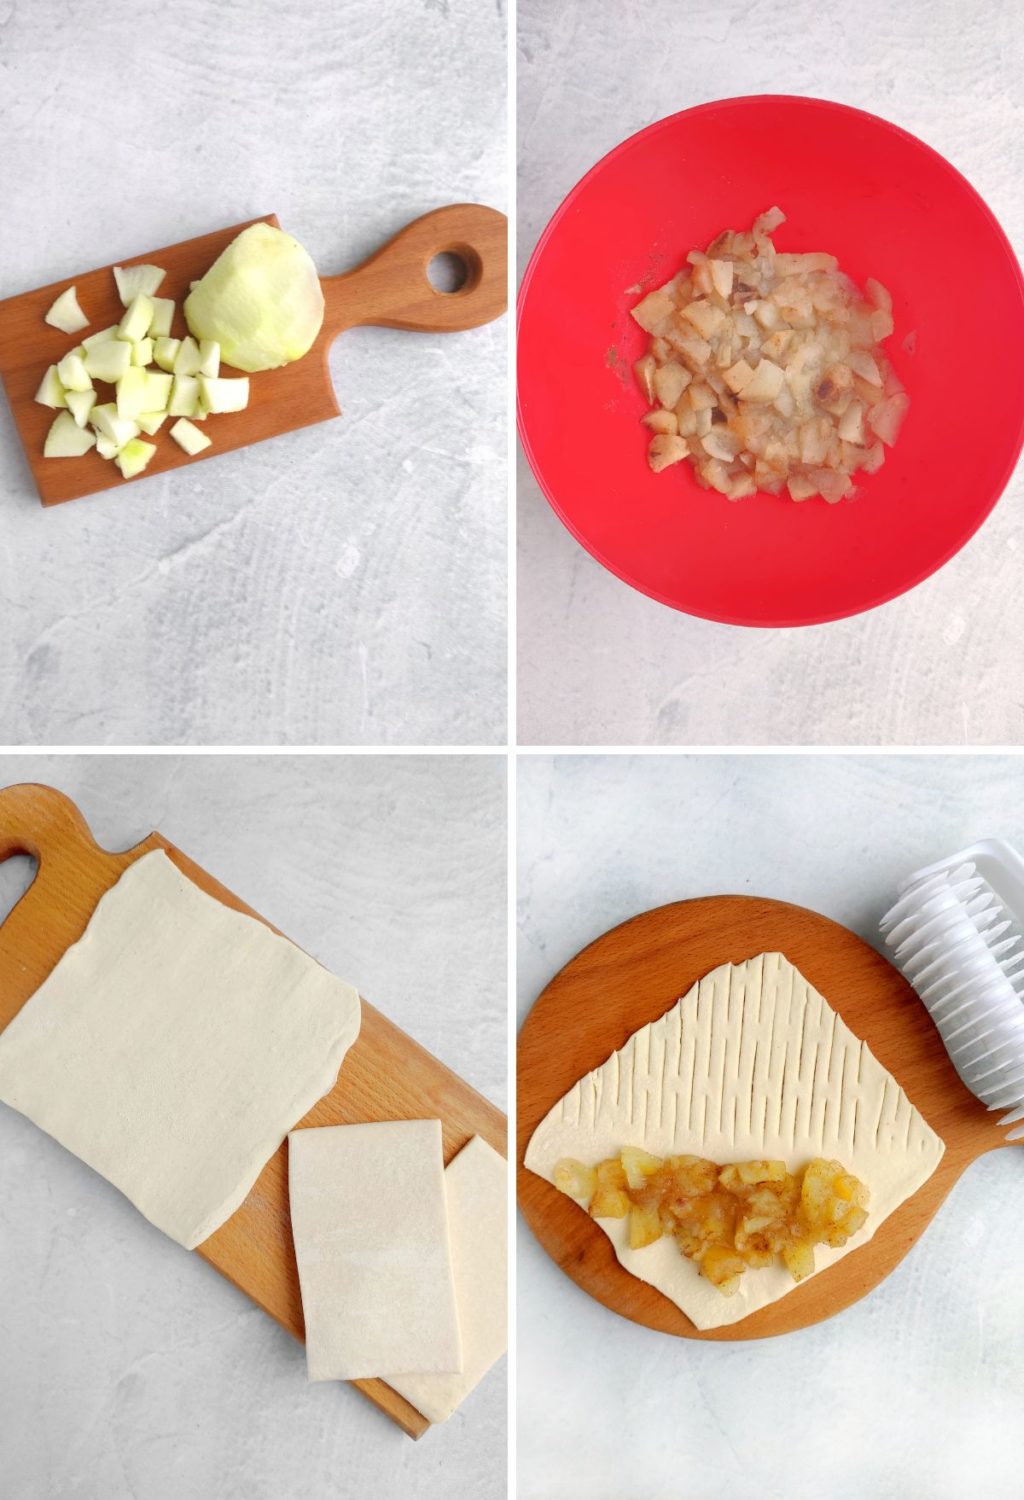 A series of photos showing how to make apple pie.